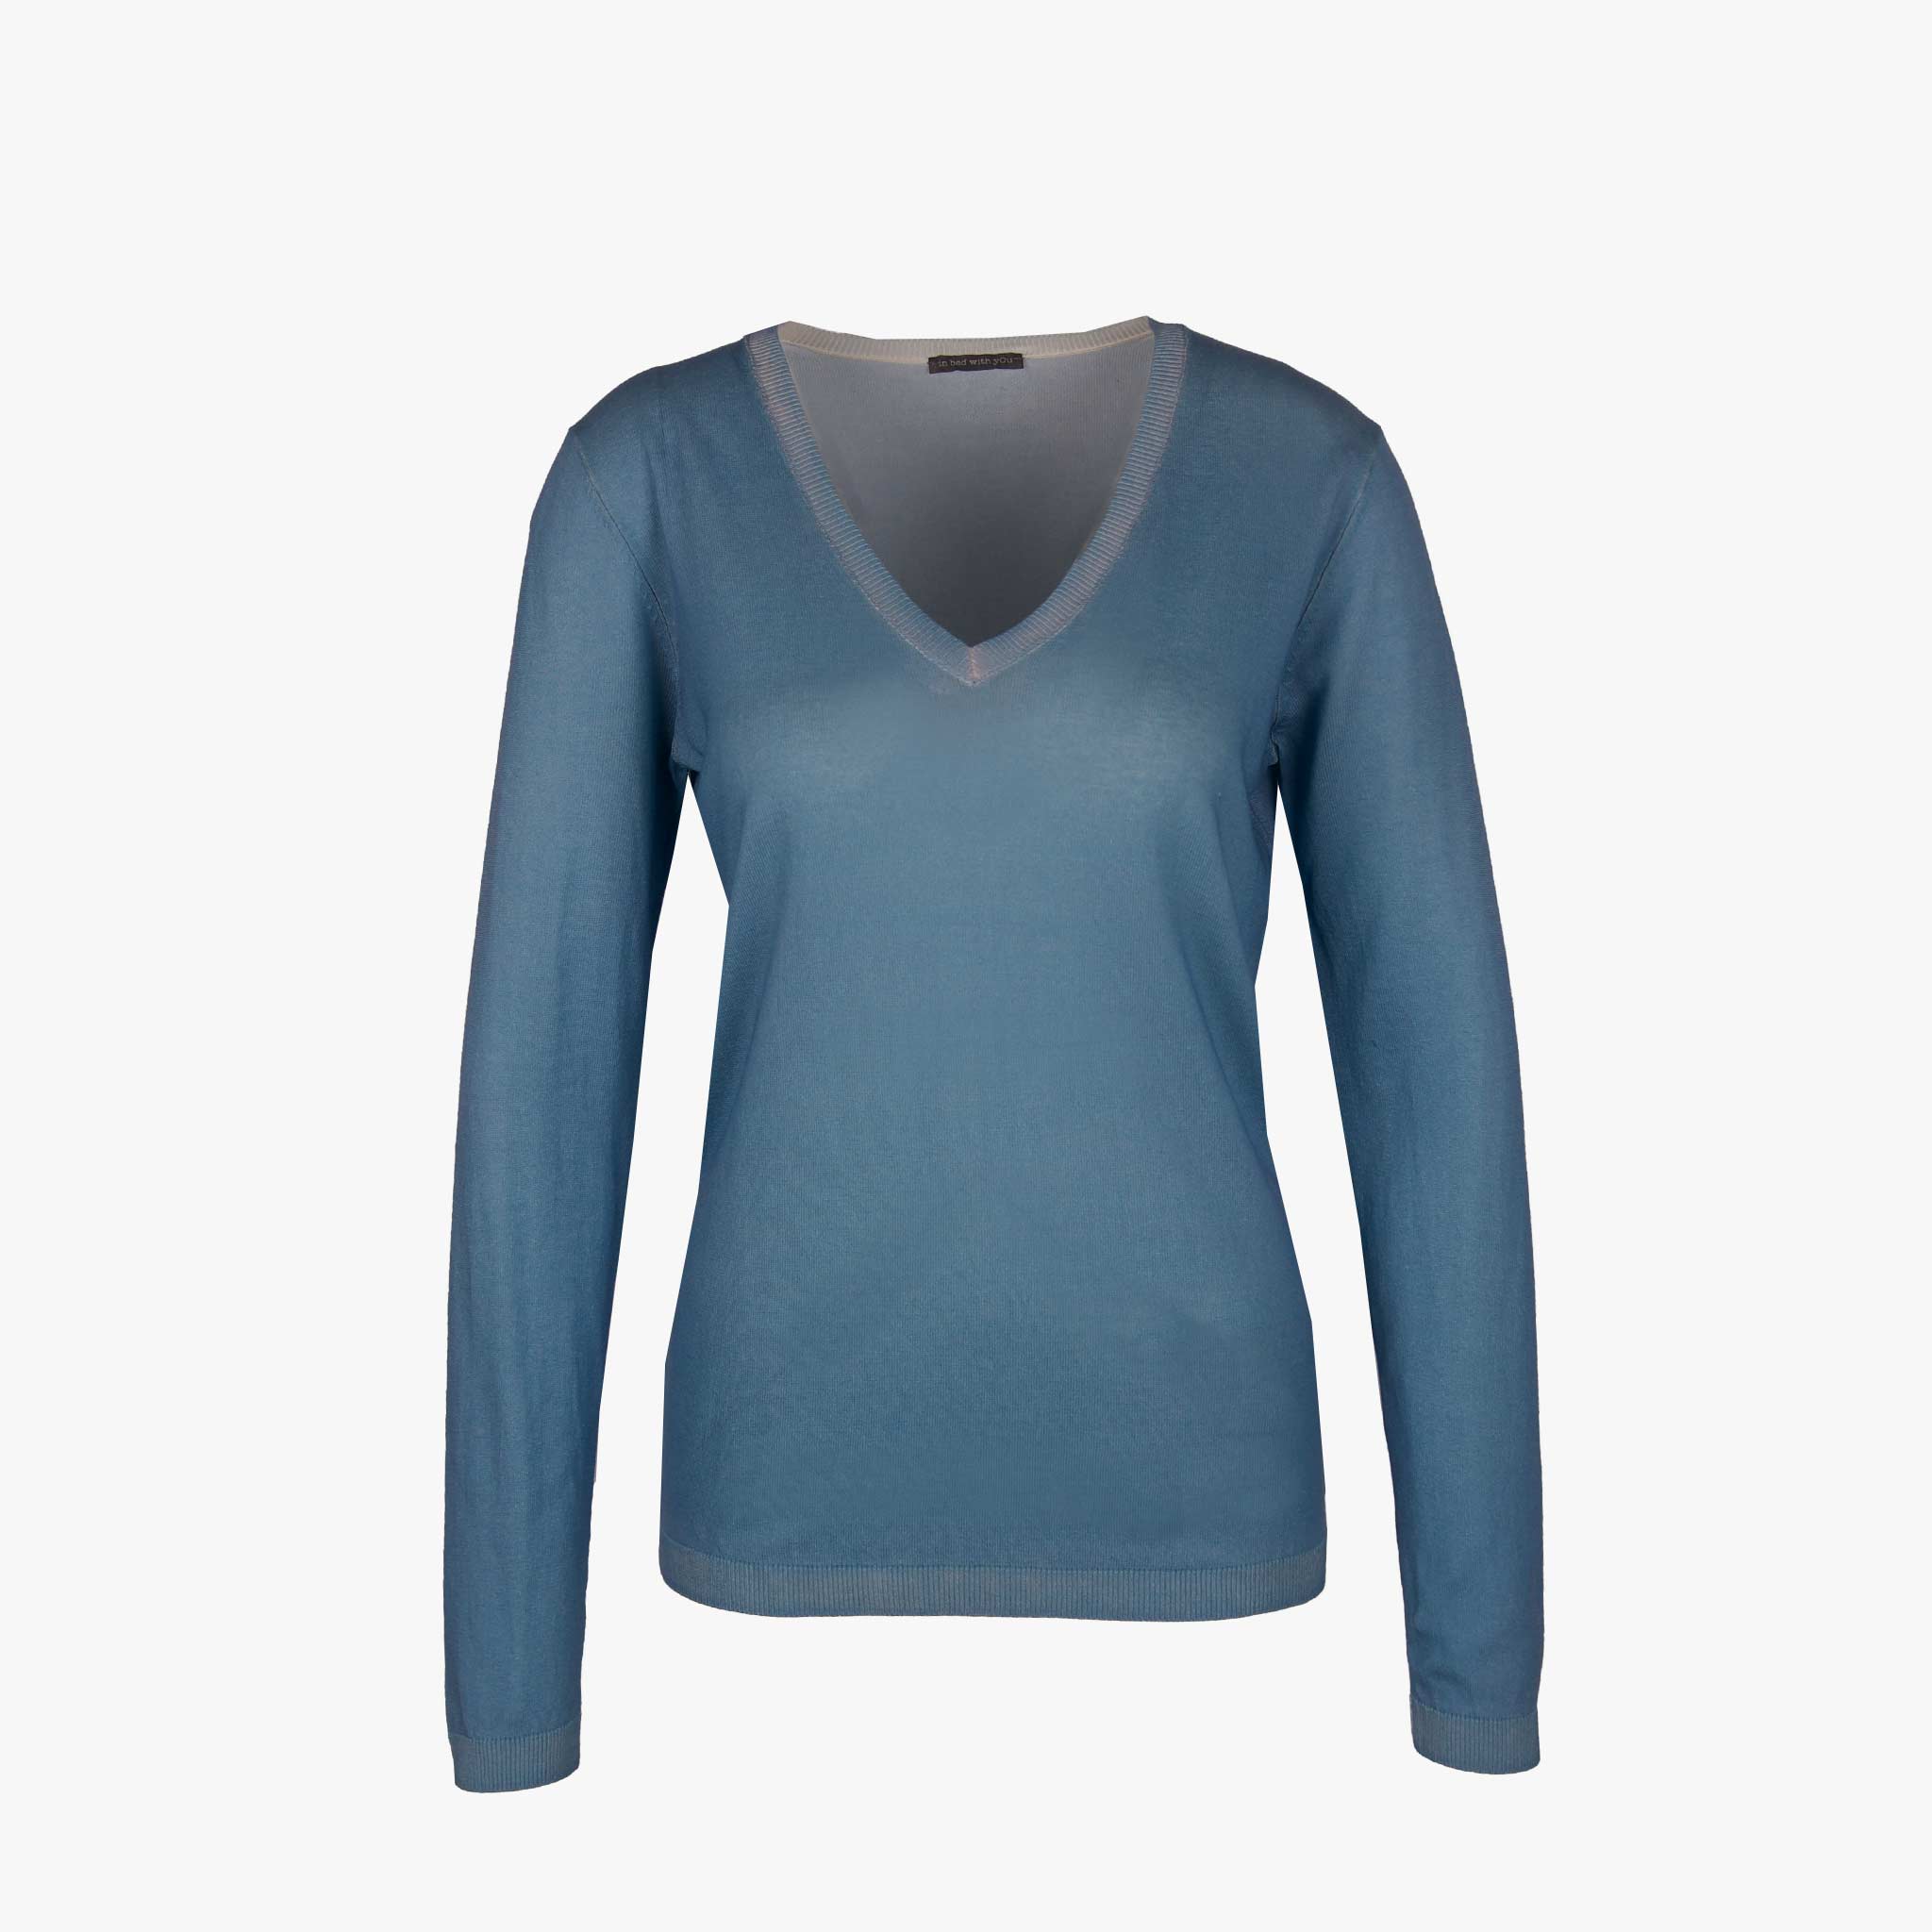 In bed with You V-Pulli | blau